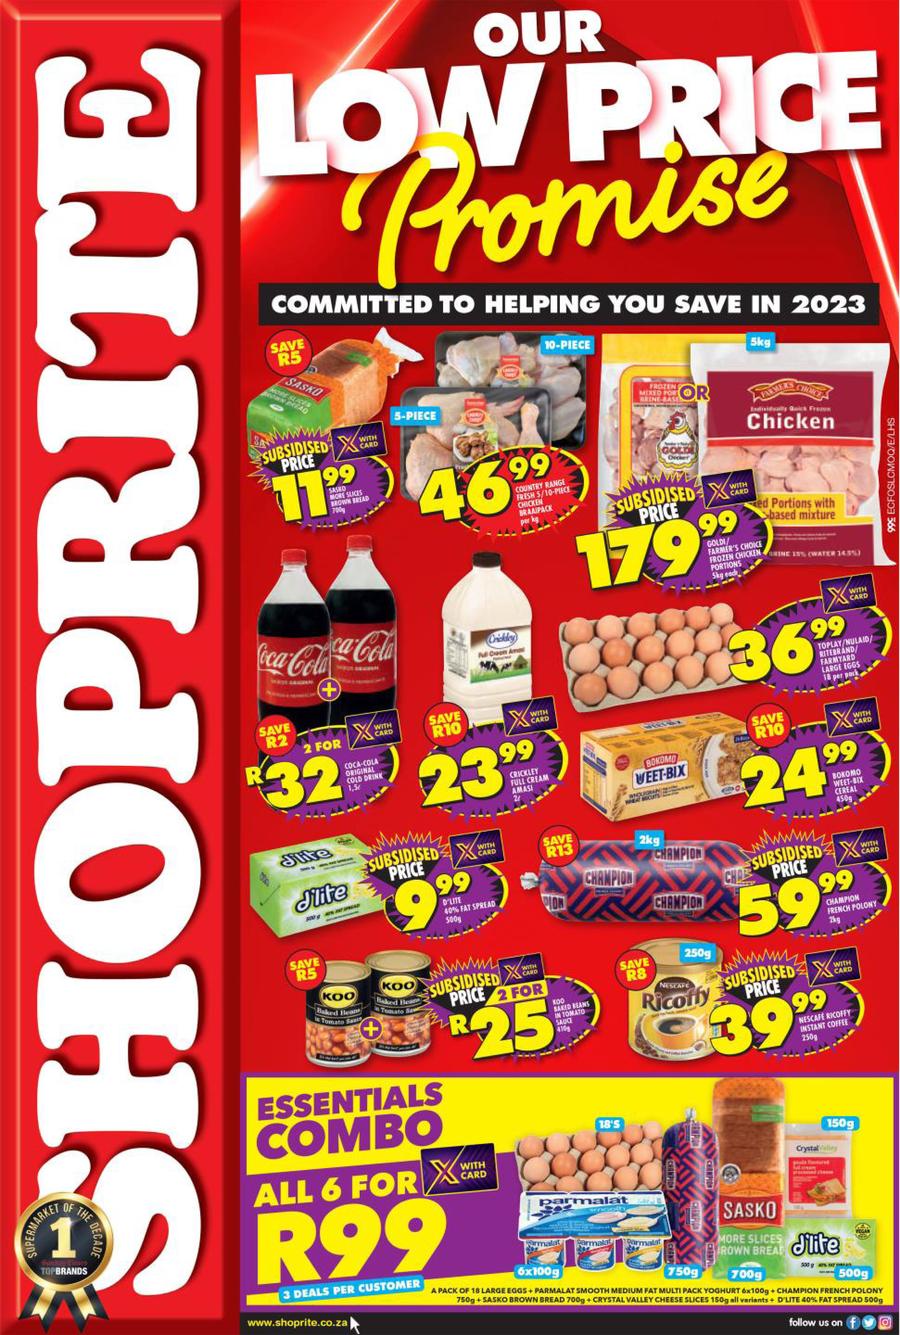 Woolworths Western Cape & Eastern Cape : Daily Difference (08 January - 21  January 2024) —